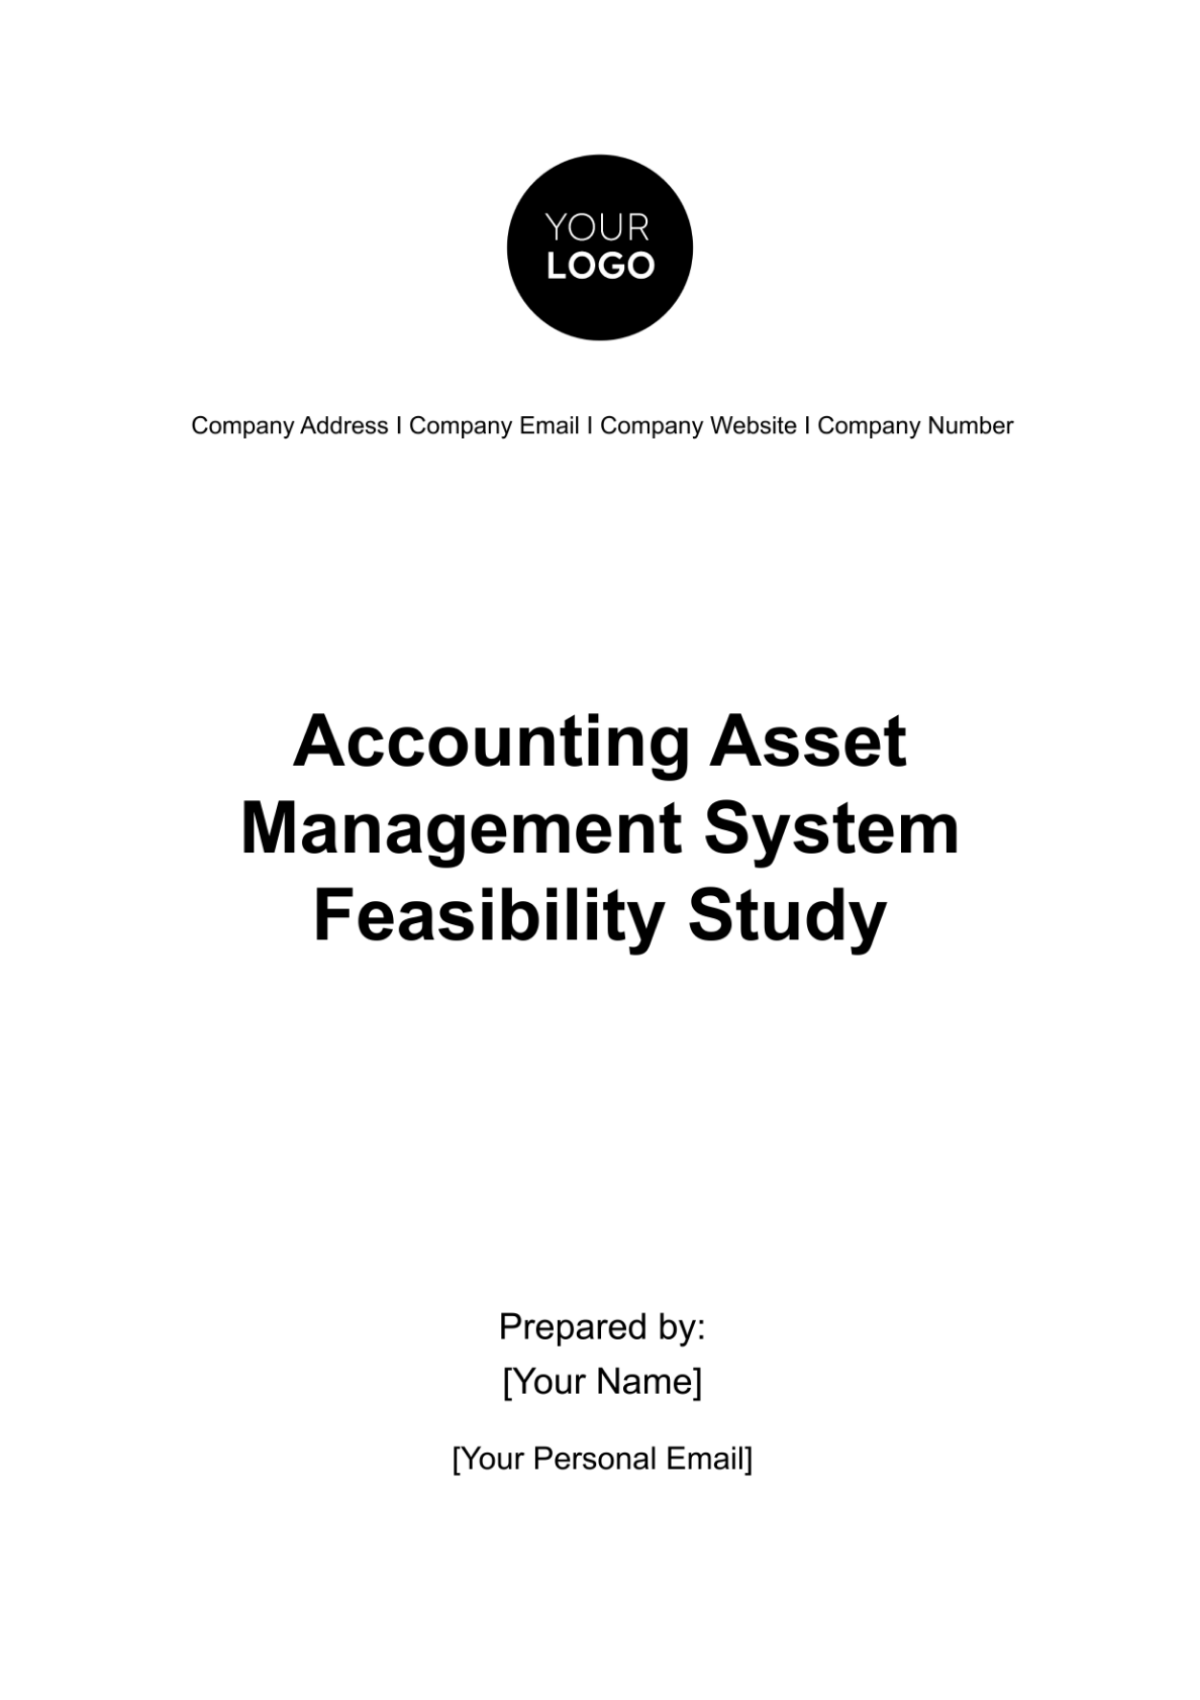 Accounting Asset Management System Feasibility Study Template